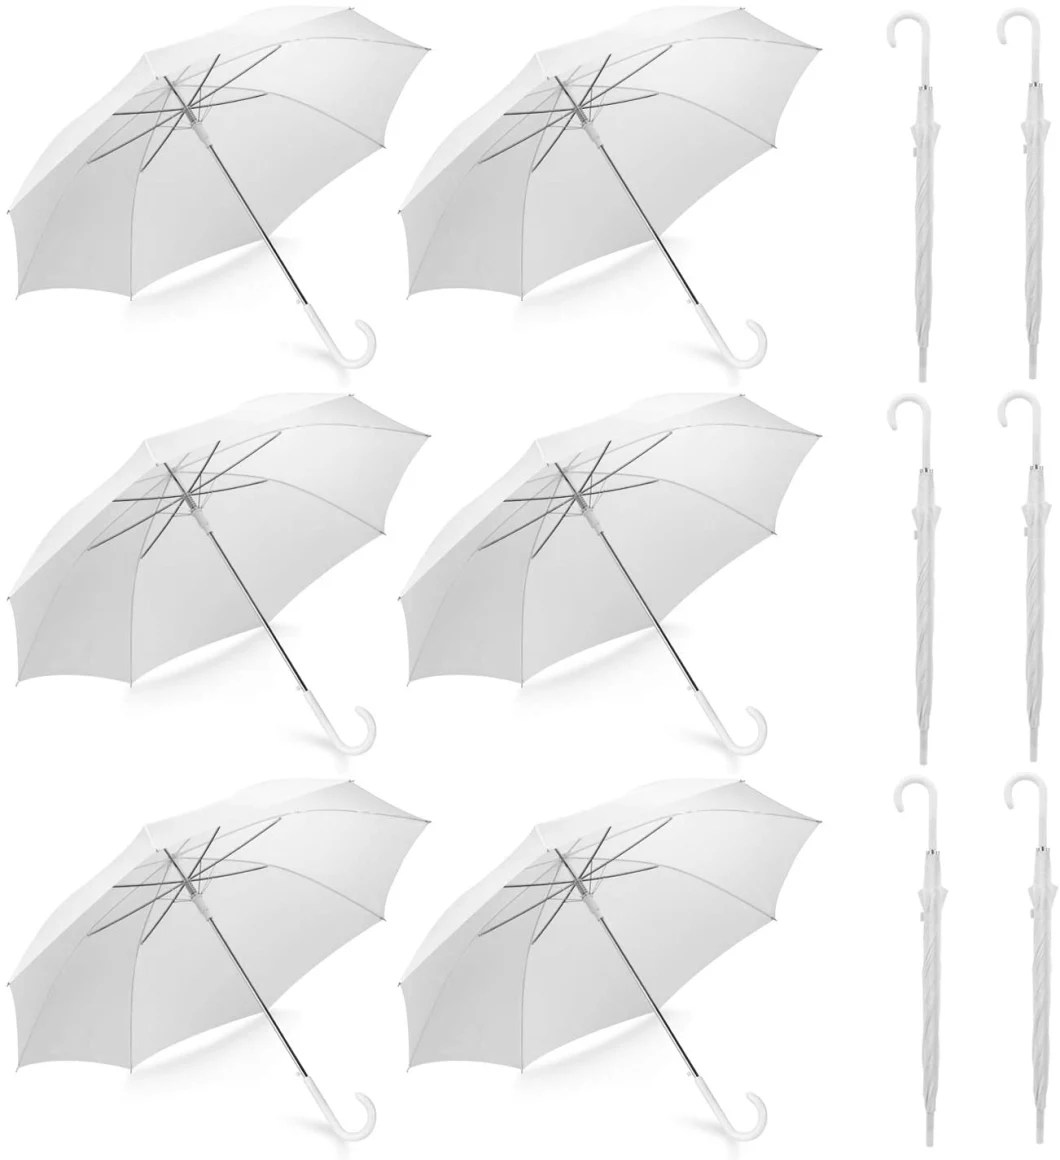 Wind-Defying Construction Wedding Style Stick Large Canopy Windproof Auto Open J Hook Handle Crystal Clear Poe Umbrella